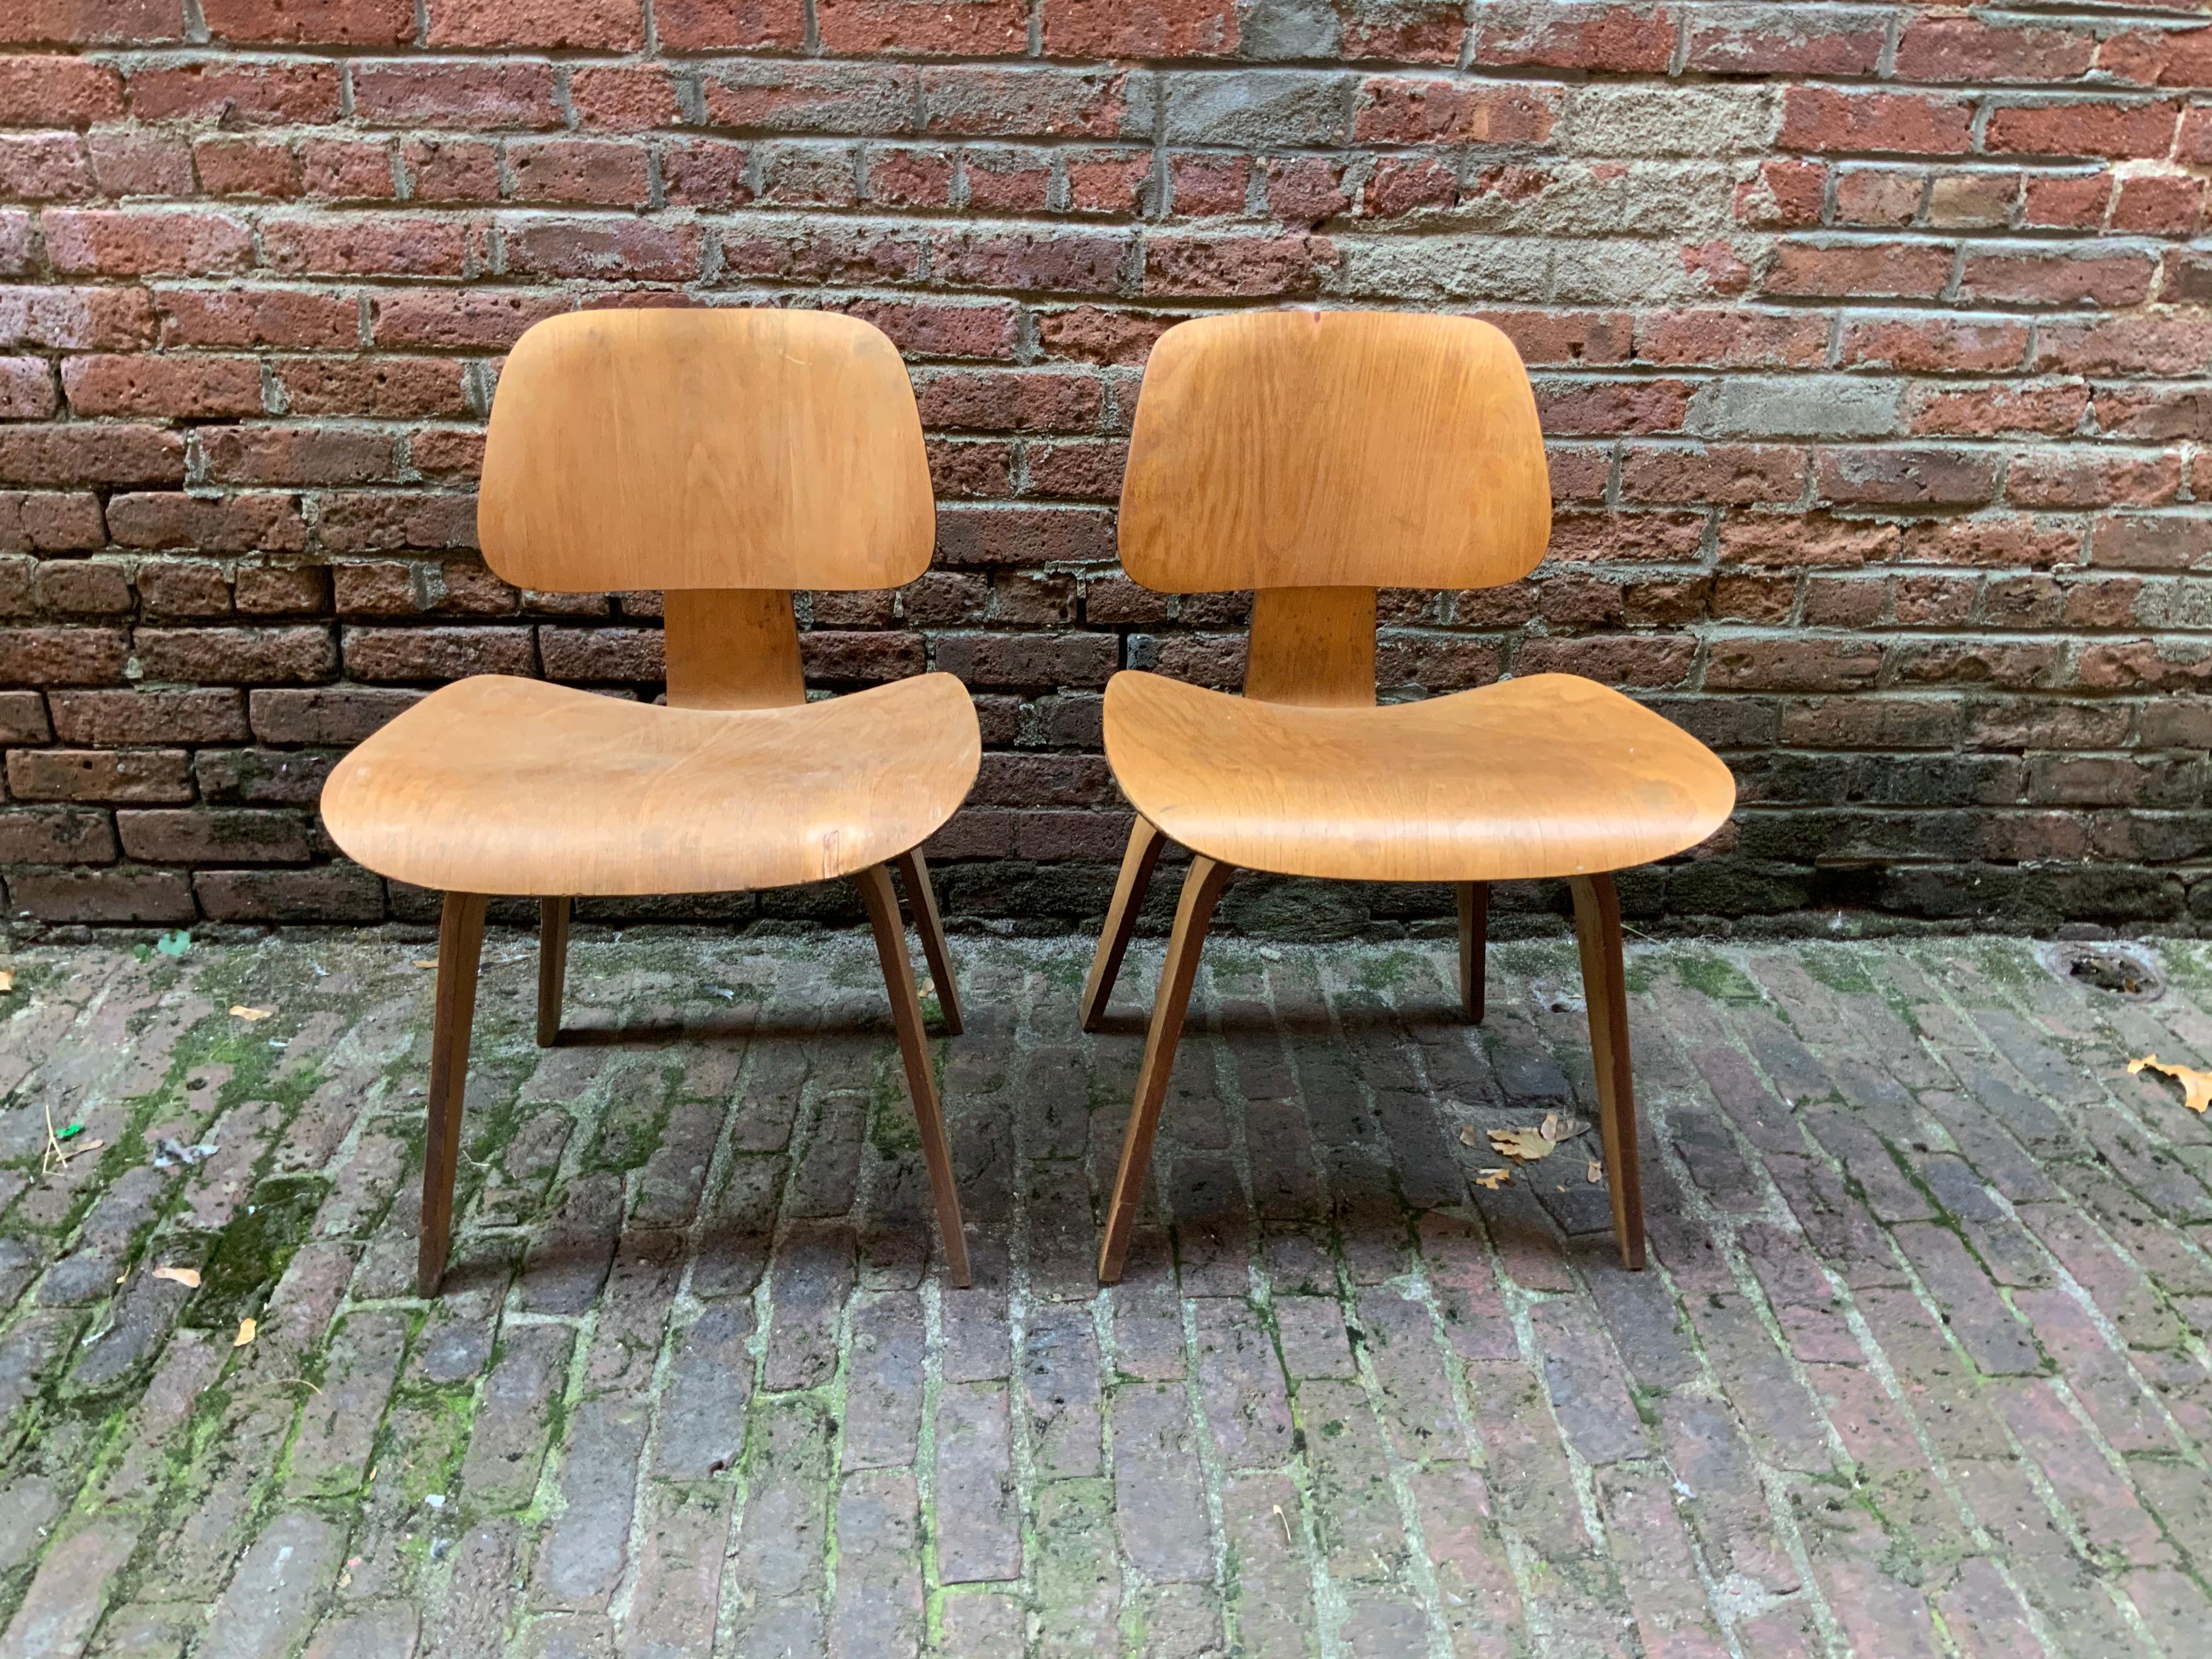 Birch laminate bentwood LCWs designed by Charles and Ray Eames. Early Post-War production. 5/2/4 screw configuration on the underside, circa 1950. Good original finish with minor staining. Original shock mounts with no visible dry rot or re-gluing.